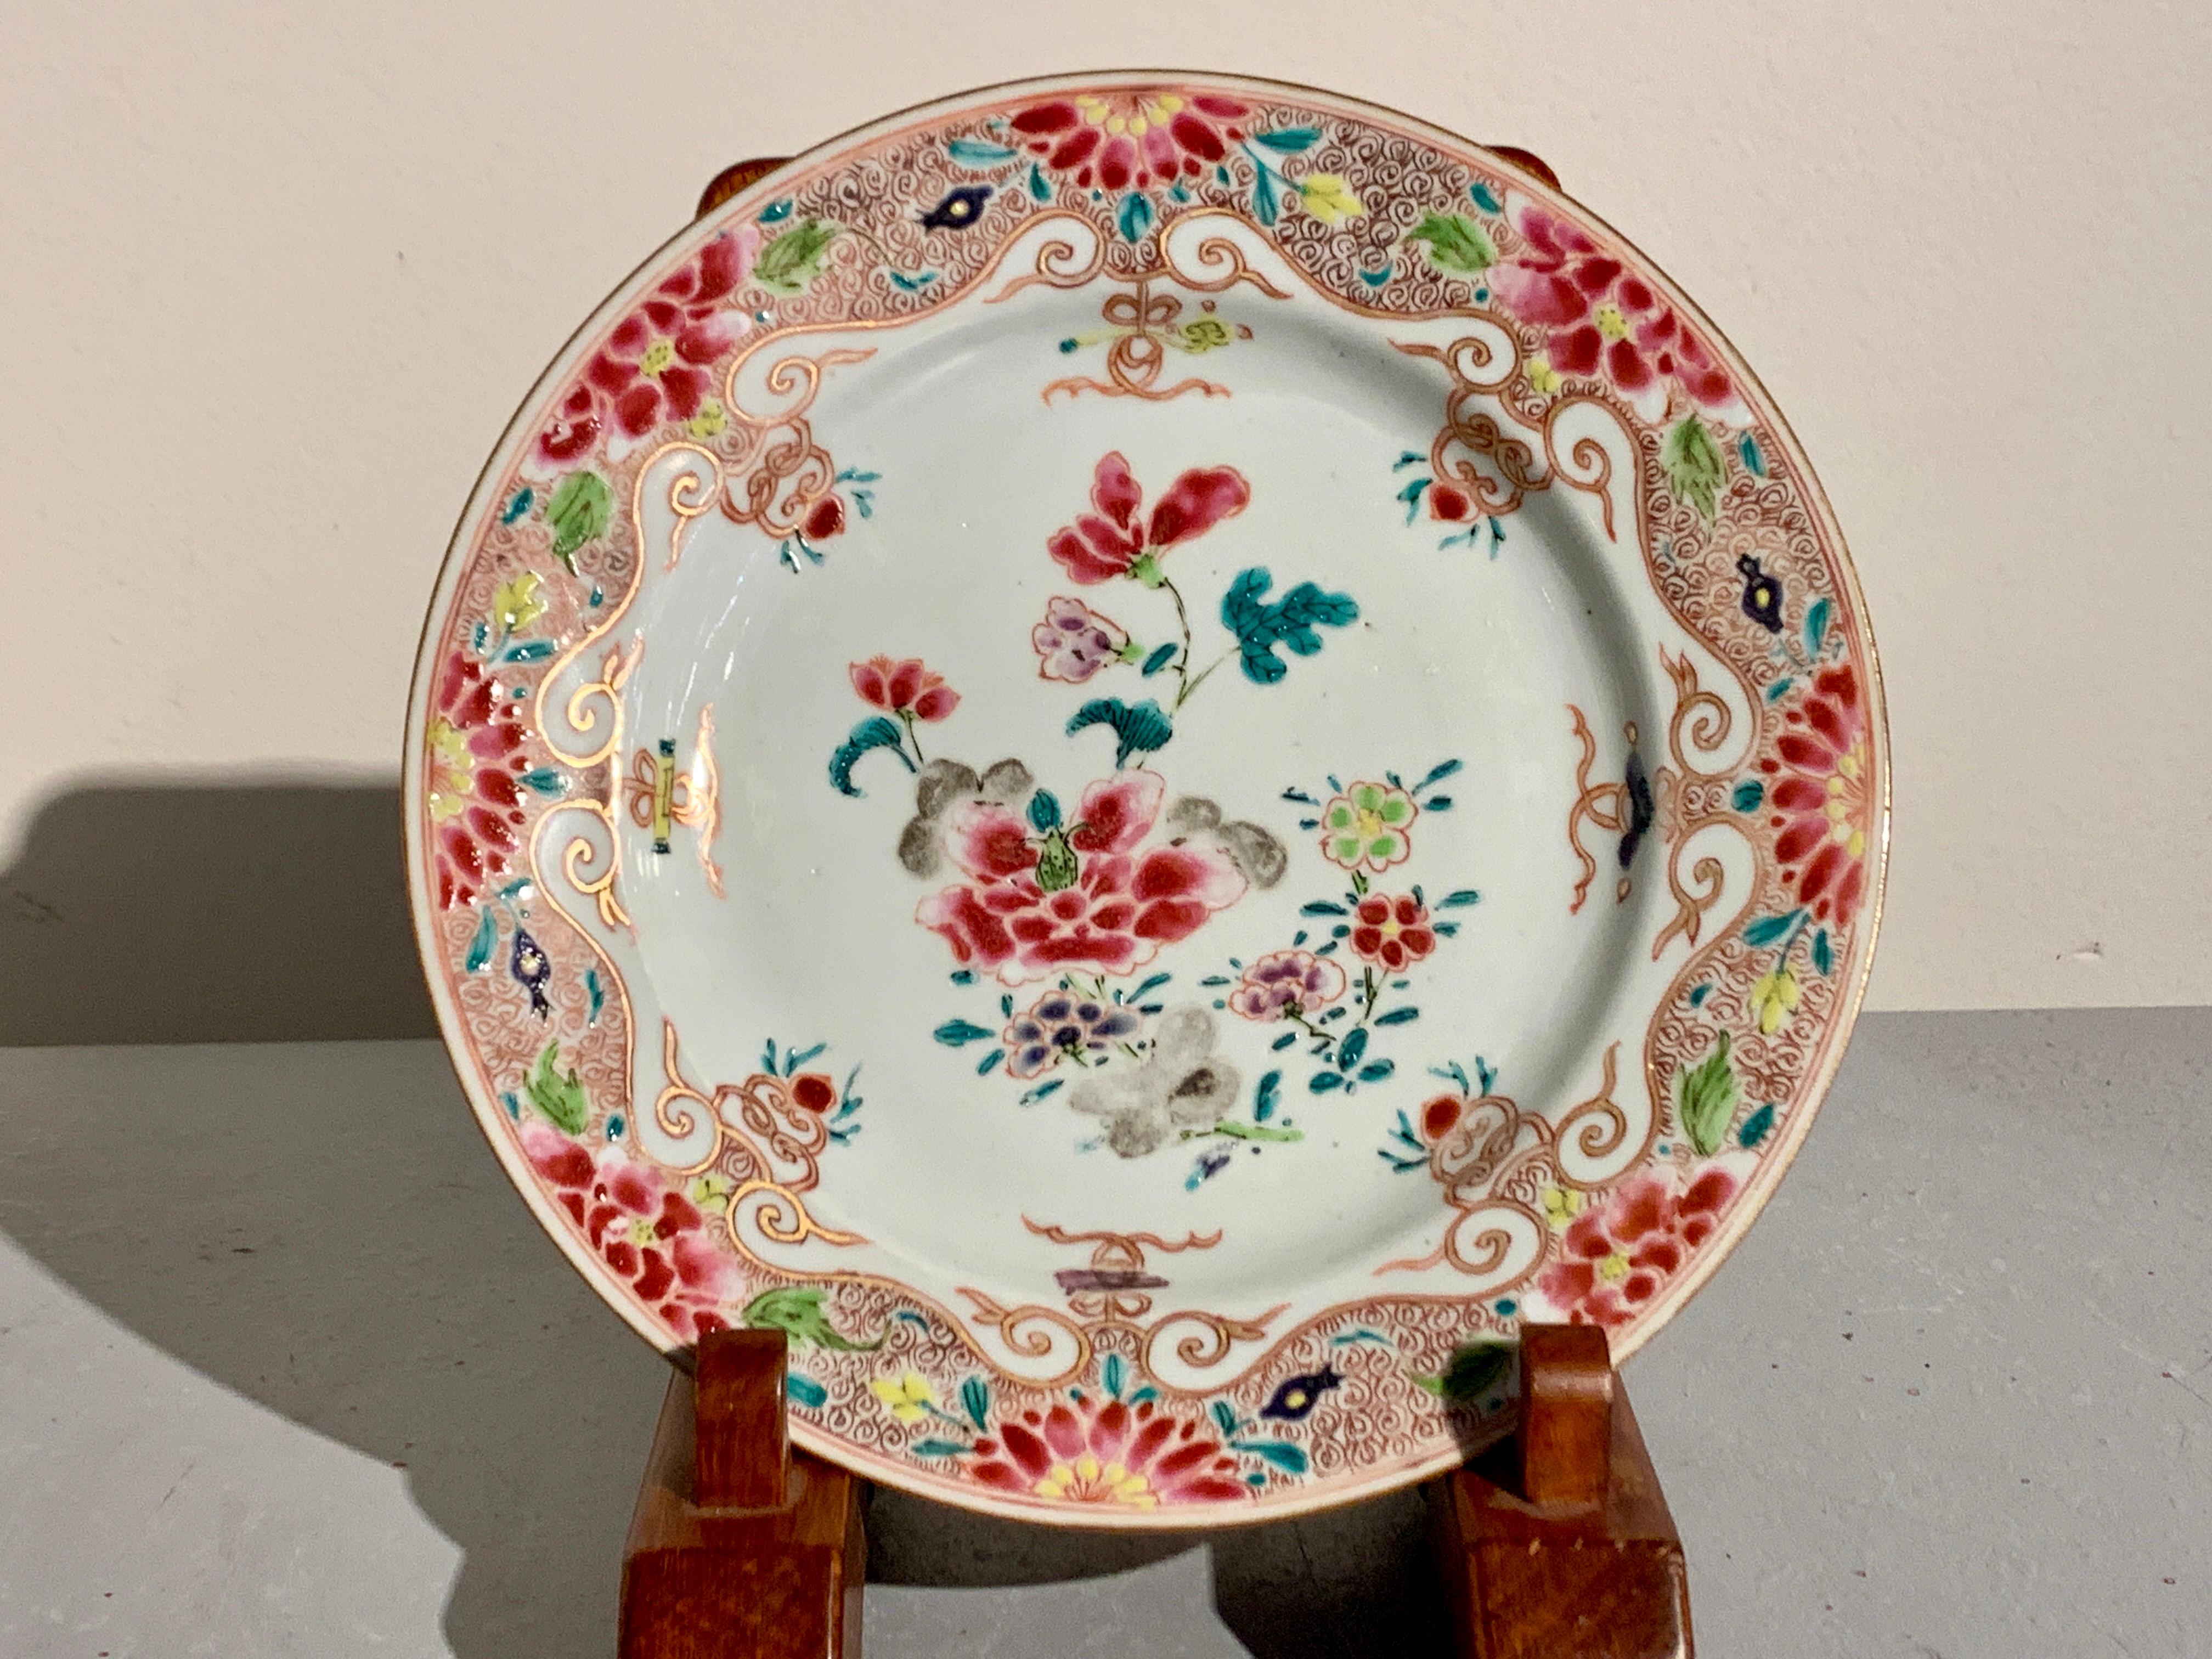 A gorgeous pair of 18th century Chinese Export porcelain plates decorated in stunning famille rose enamels, Yongzheng Period, circa 1730, China.

The small plates decorated in bright and bold famille rose enamels, with pink dominating the color